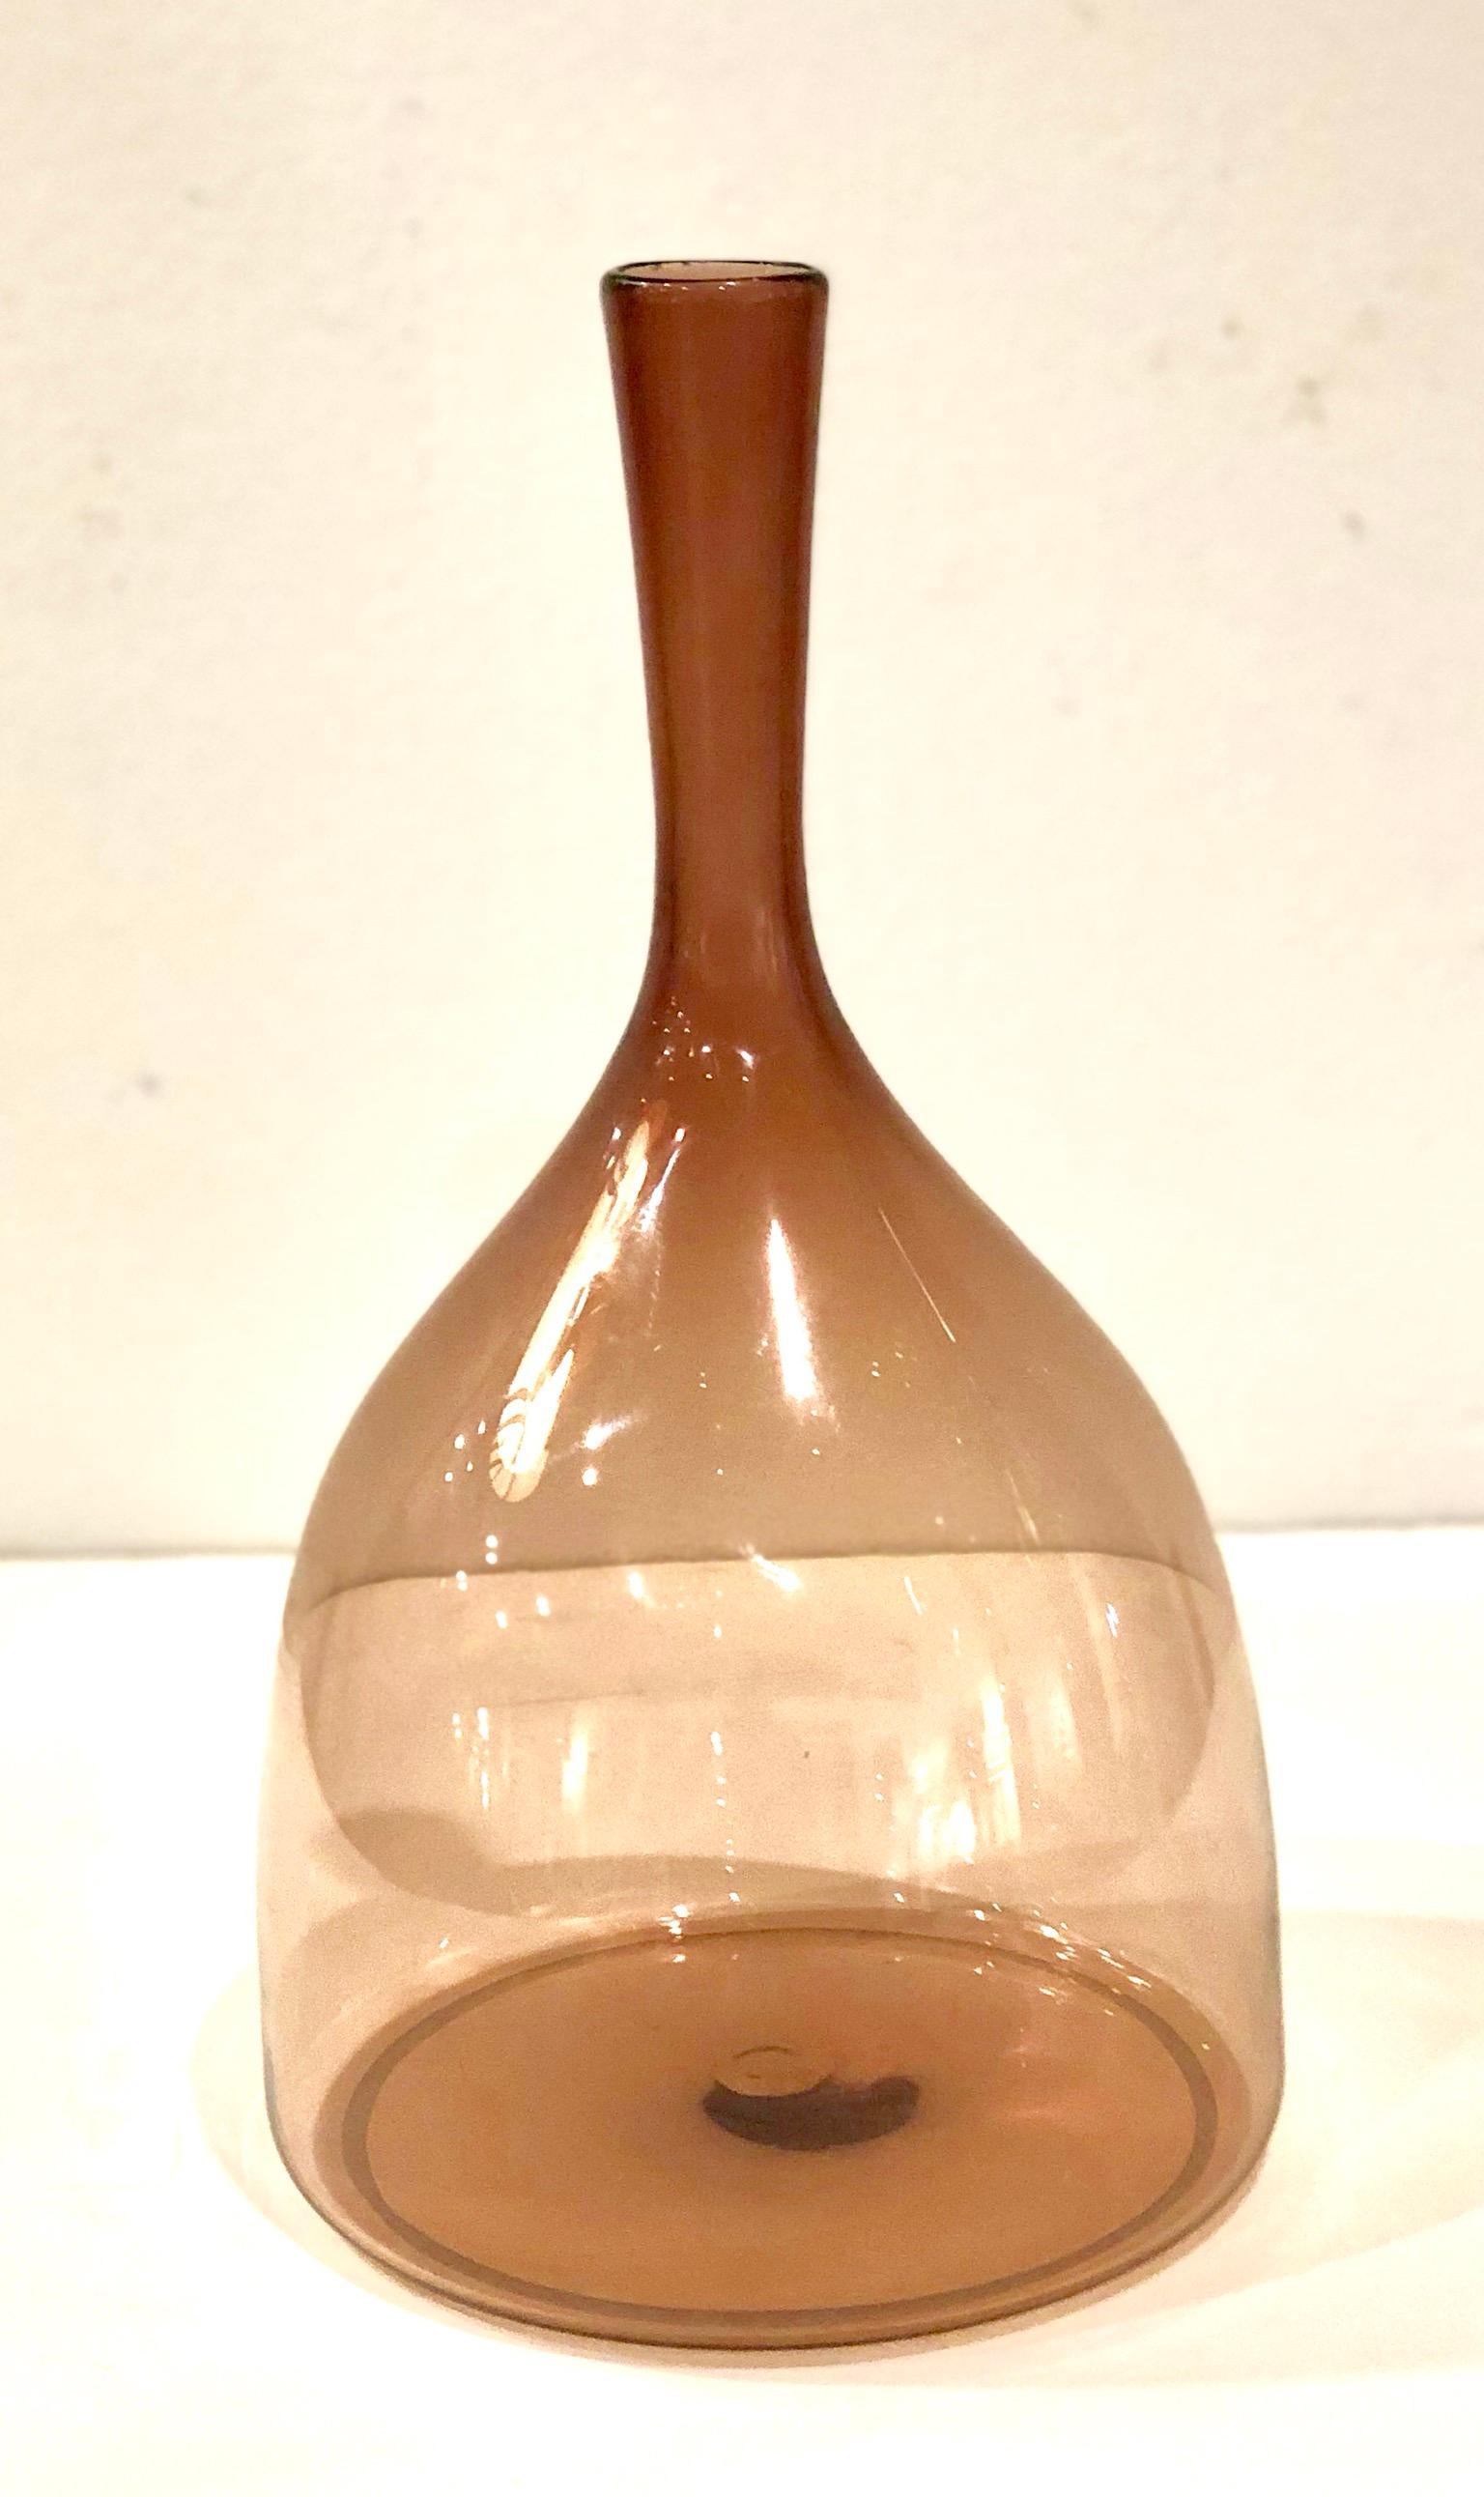 Gorgeous Danish modern mouth blown glass bottle, beautiful lines and excellent condition, signed and dated no chips or cracks.